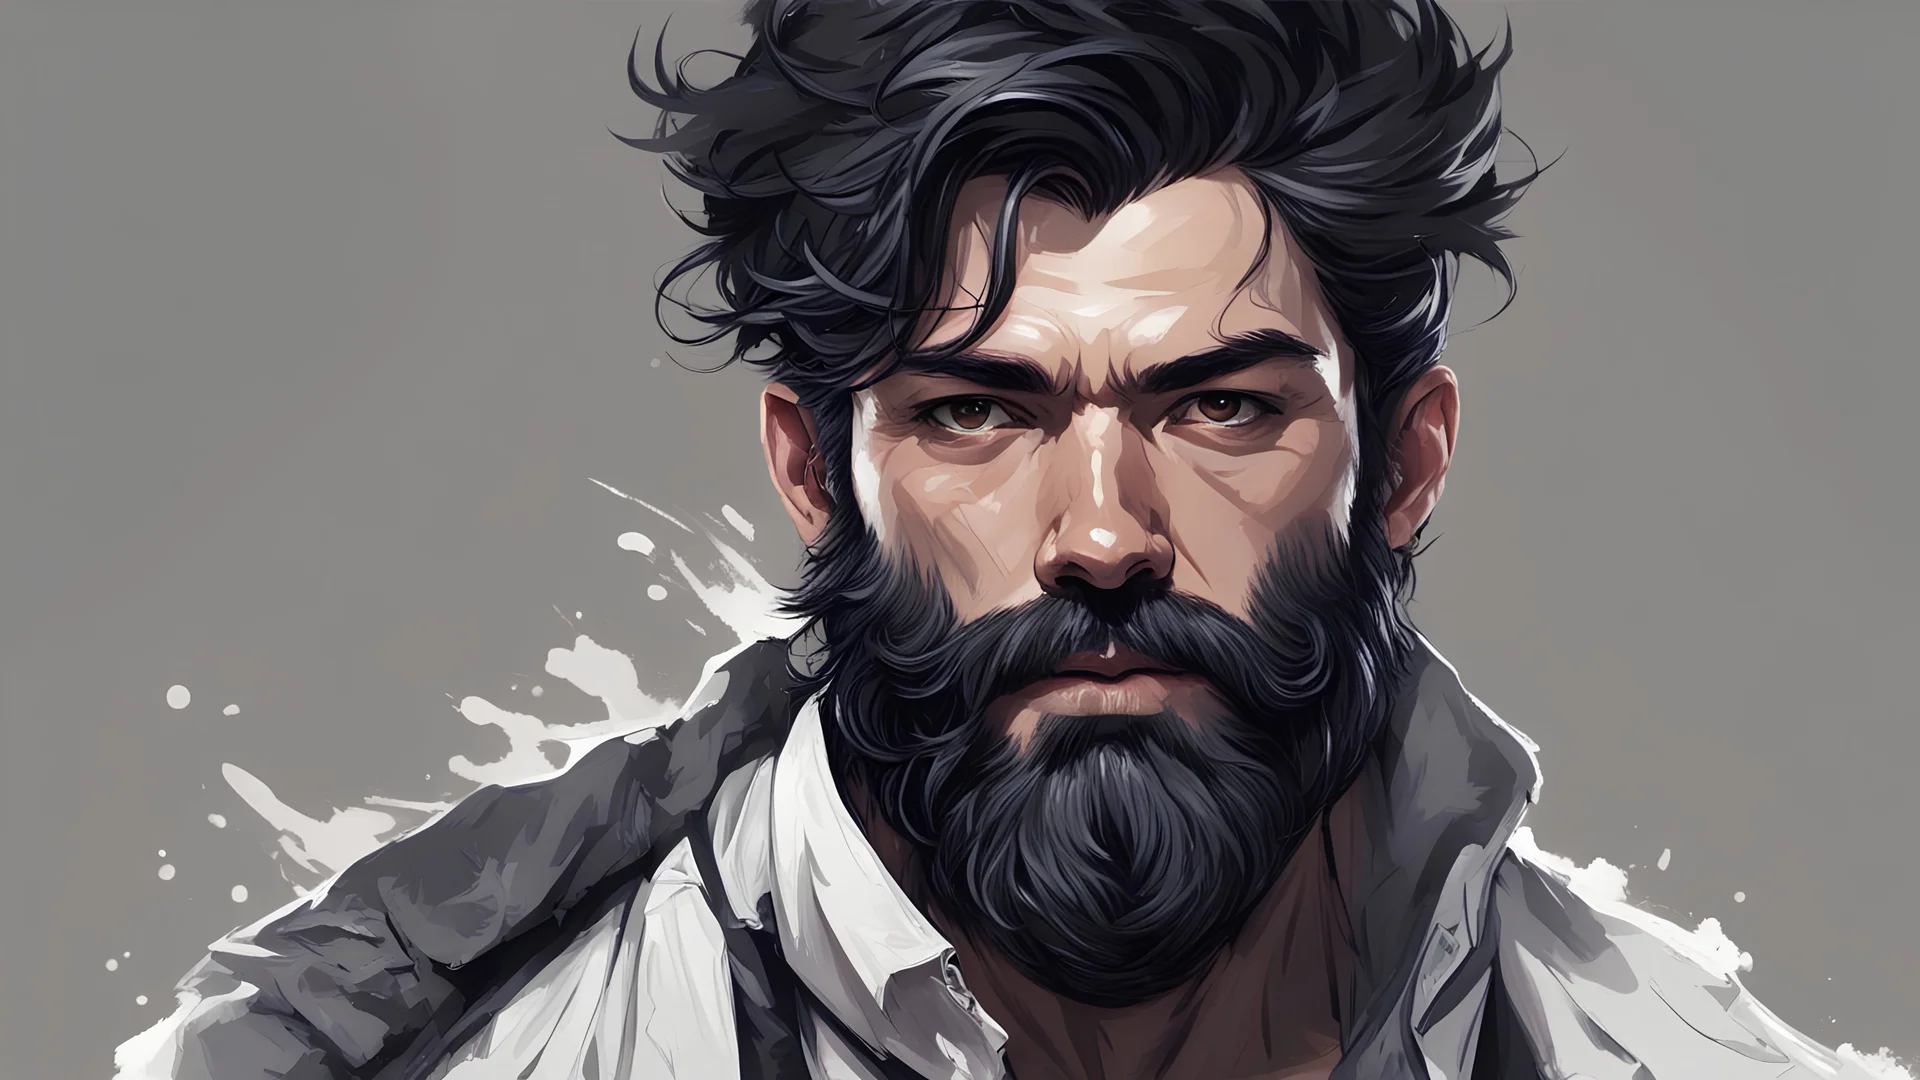 Men, 38 years, 176 cm tall, Short black hair with white highlights, messy hairstyle, black bearded beard, also with white highlights (masterpiece) draw, horror art style